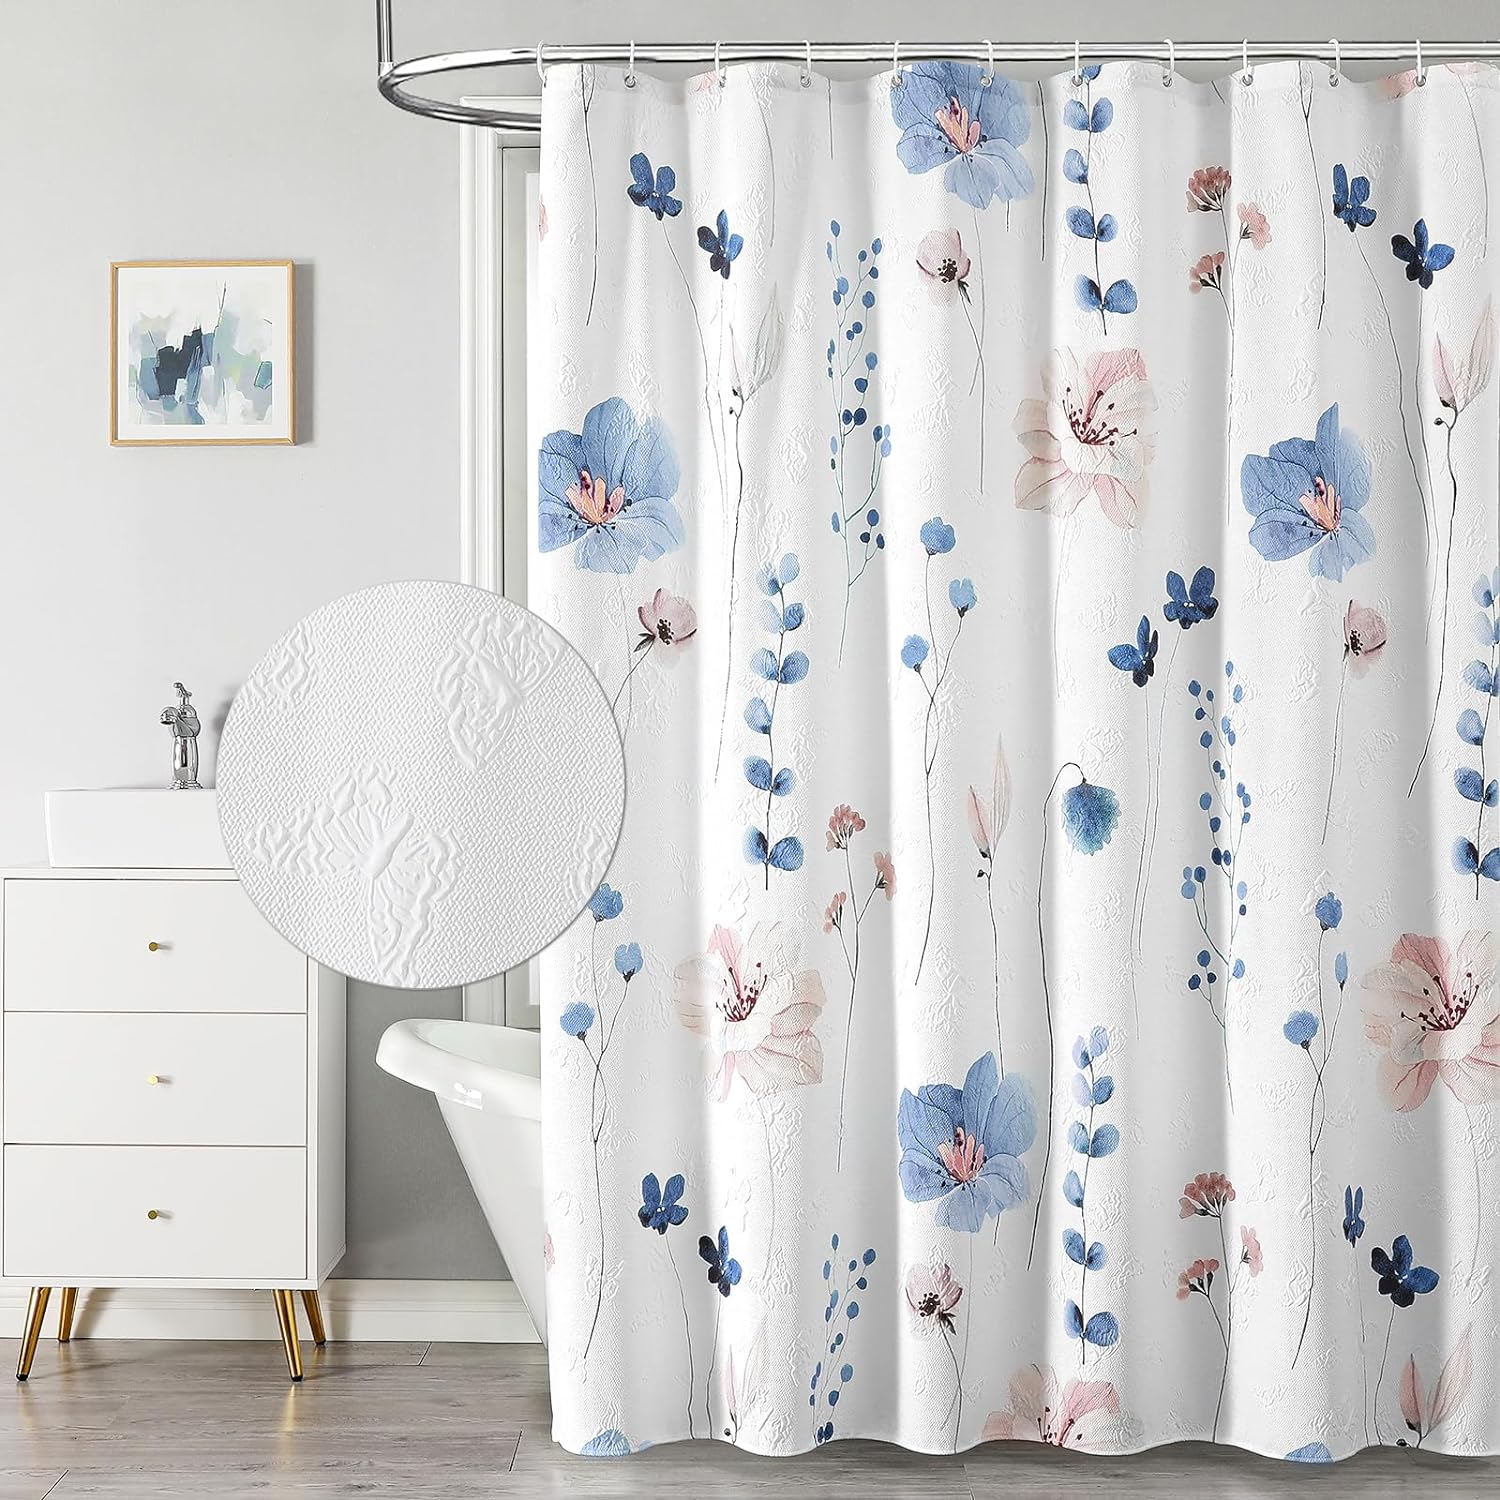 QiyI Watercolor Floral Shower Curtain, 3D Embossed Textured Blue Pink Flower Bathroom Curtain, Modern Minimalist White Cloth Bath Curtain, Waterproof Fabric Shower Curtain Set with Hooks, 72x72 Inch